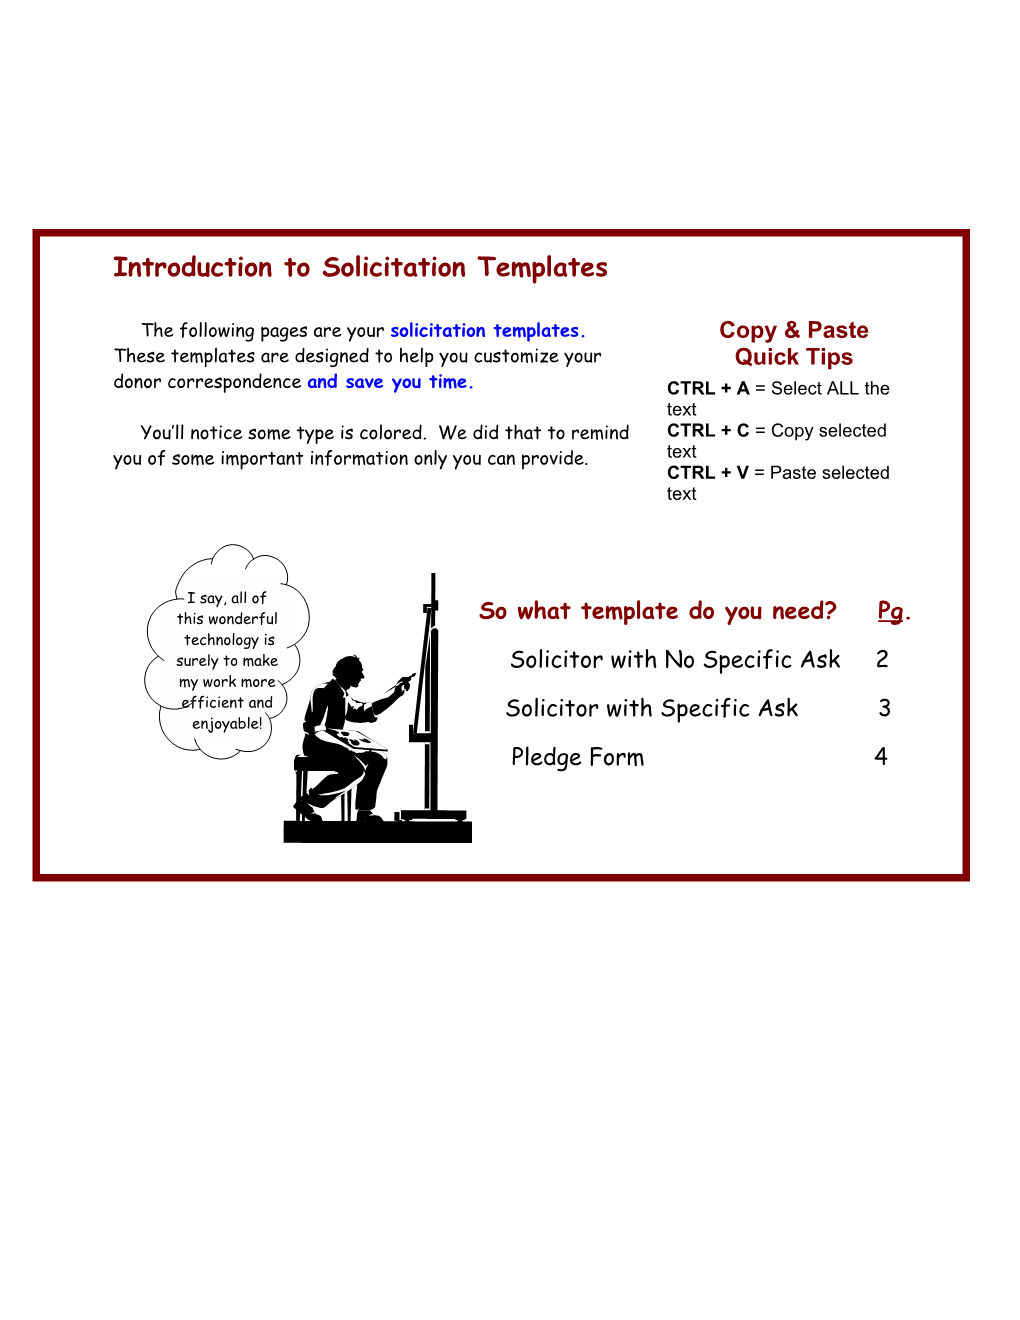 Introduction to Solicitation Templates